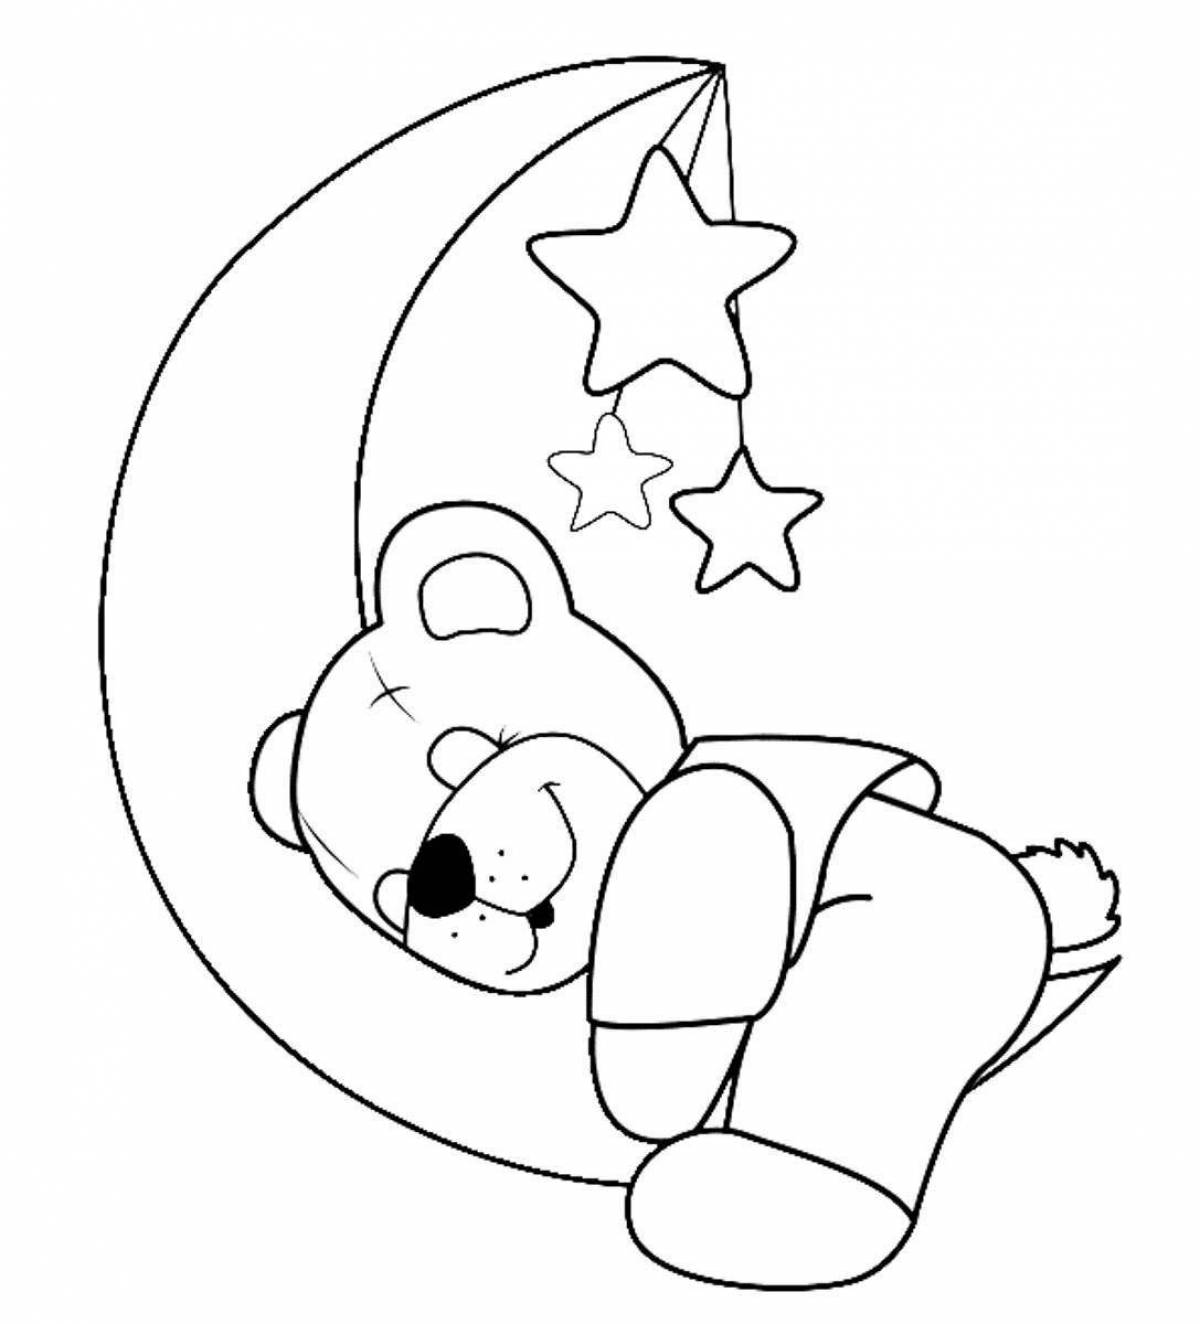 Coloring dreamy bear on the moon